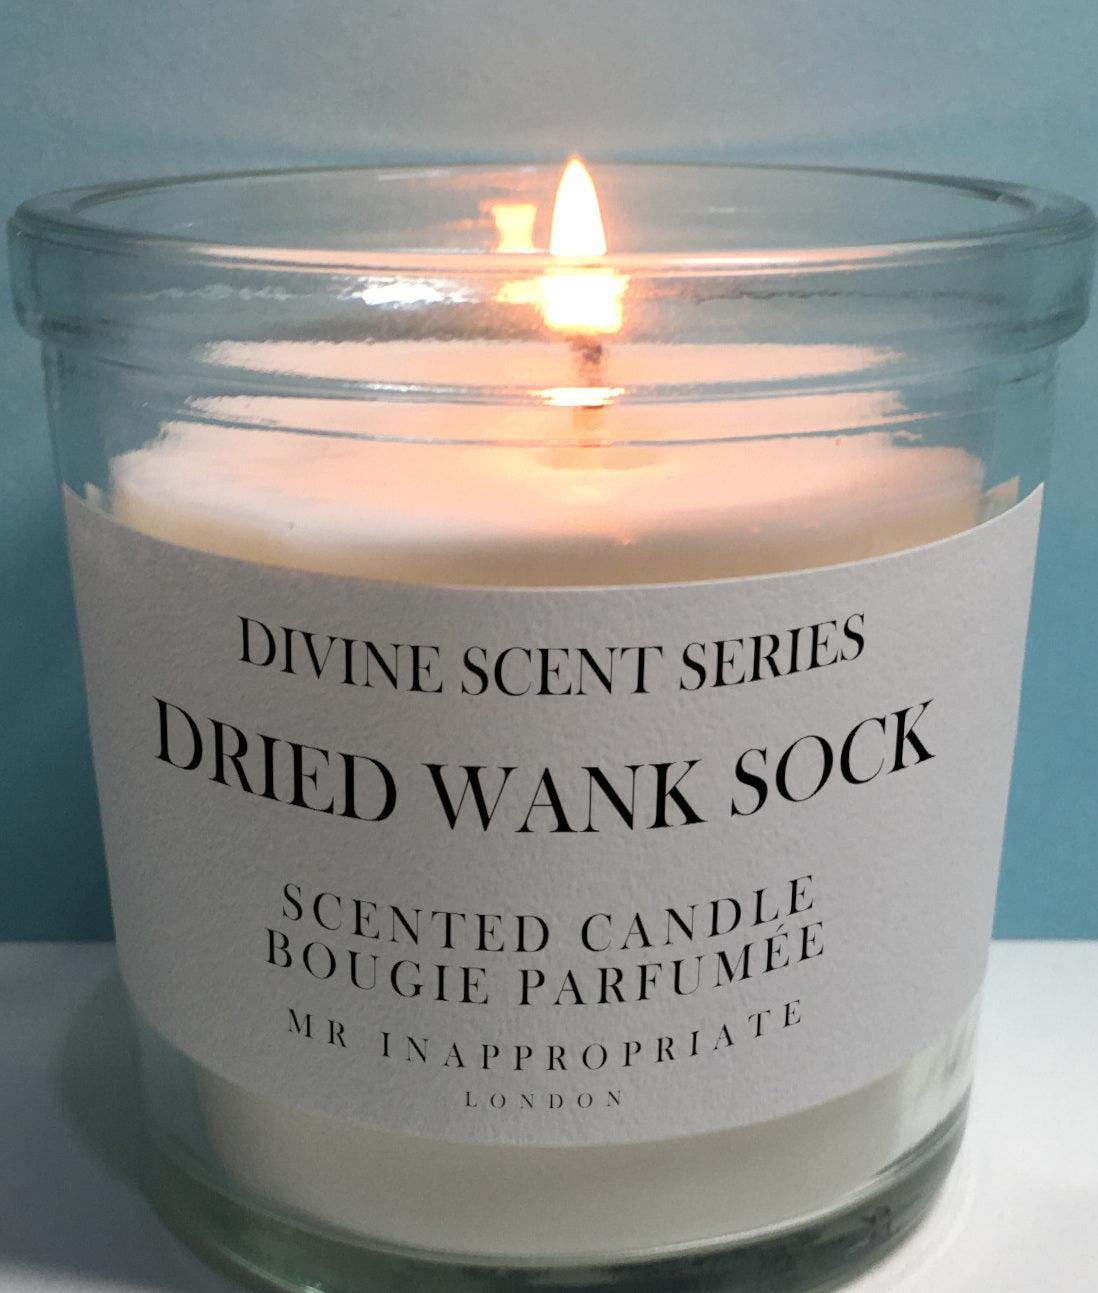 Candle - Dried Wank Sock - Mr. Inappropriate 